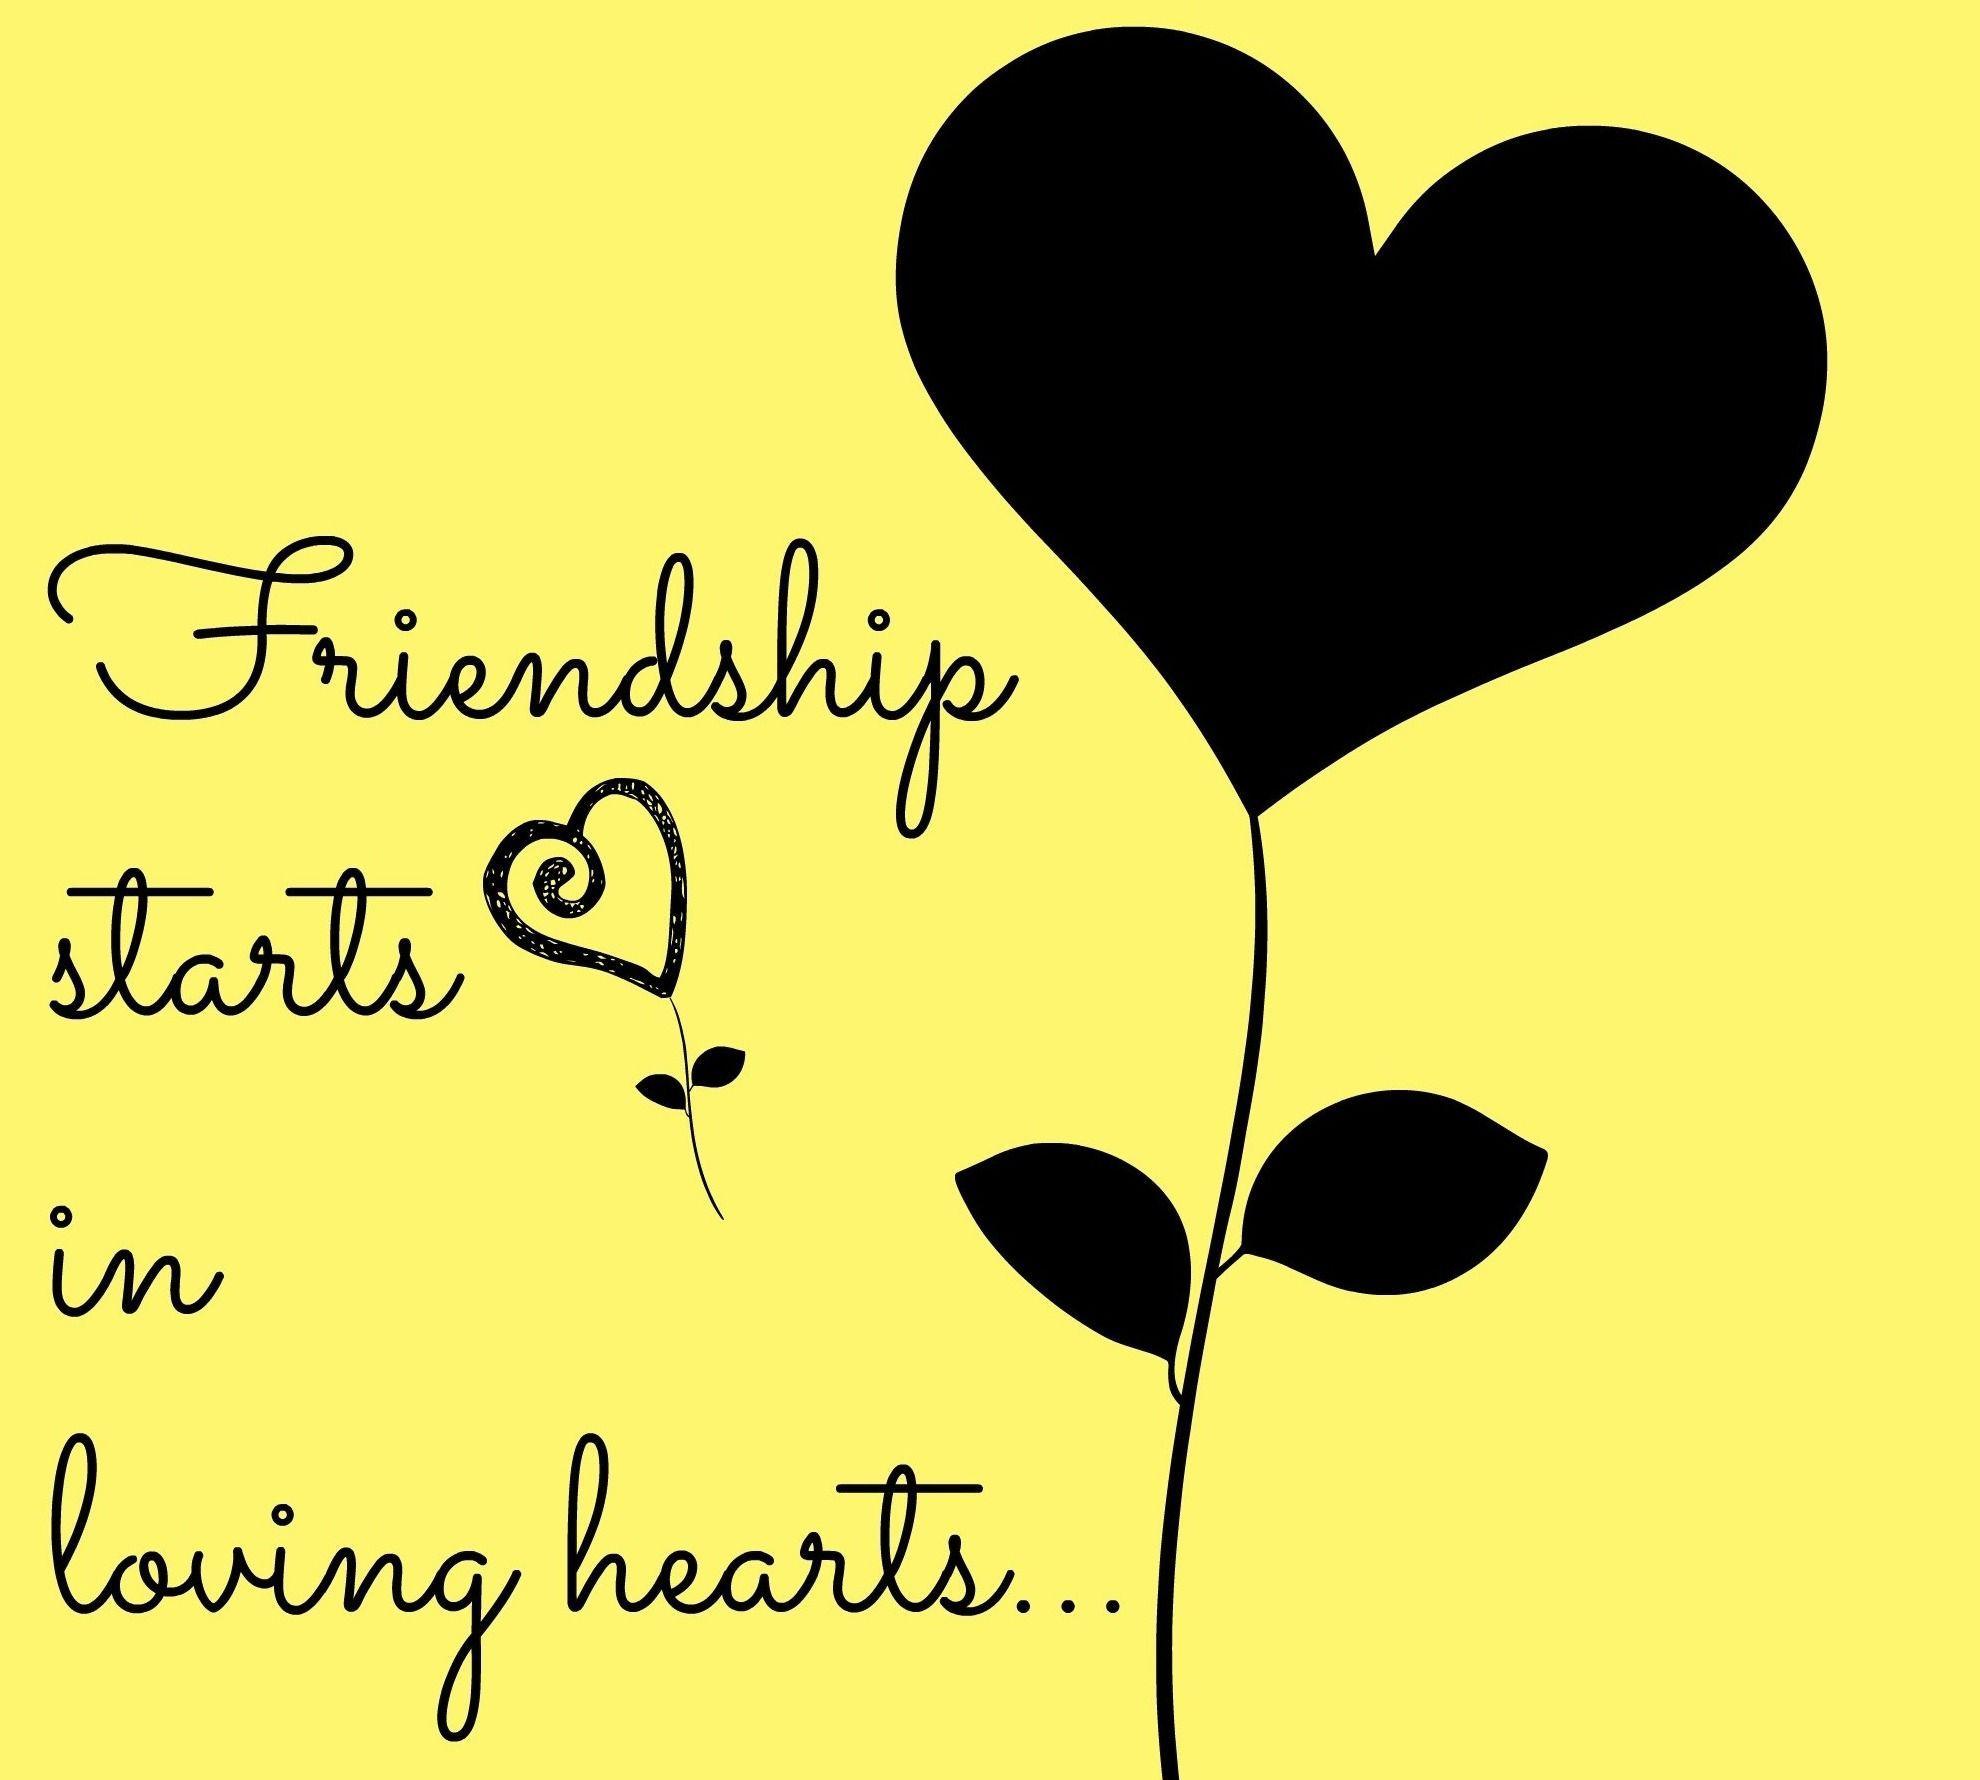 Friendship Quotes and Sayings. Neat sayings